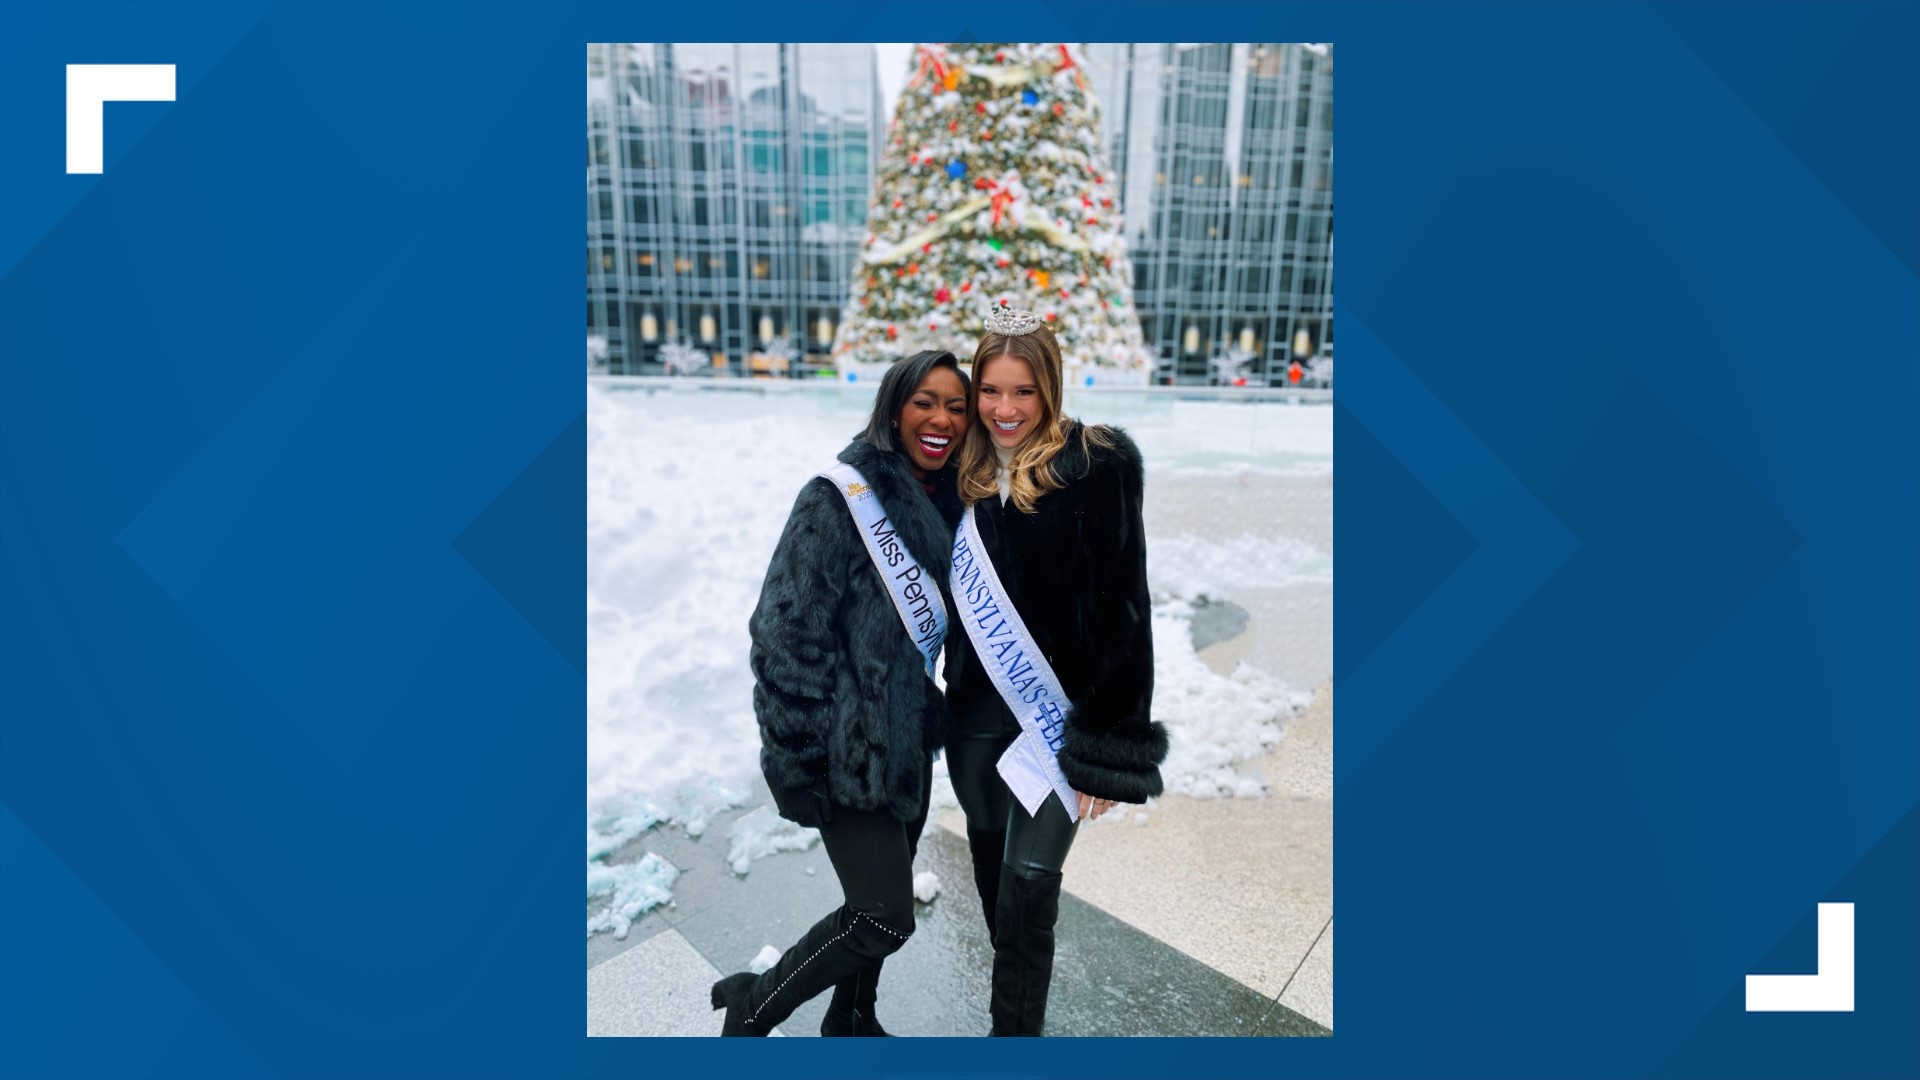 Both Miss Pennsylvania's Outstanding Teen and Miss Pennsylvania joined FOX43 on June 18 to talk pageants, scholarships, and more.